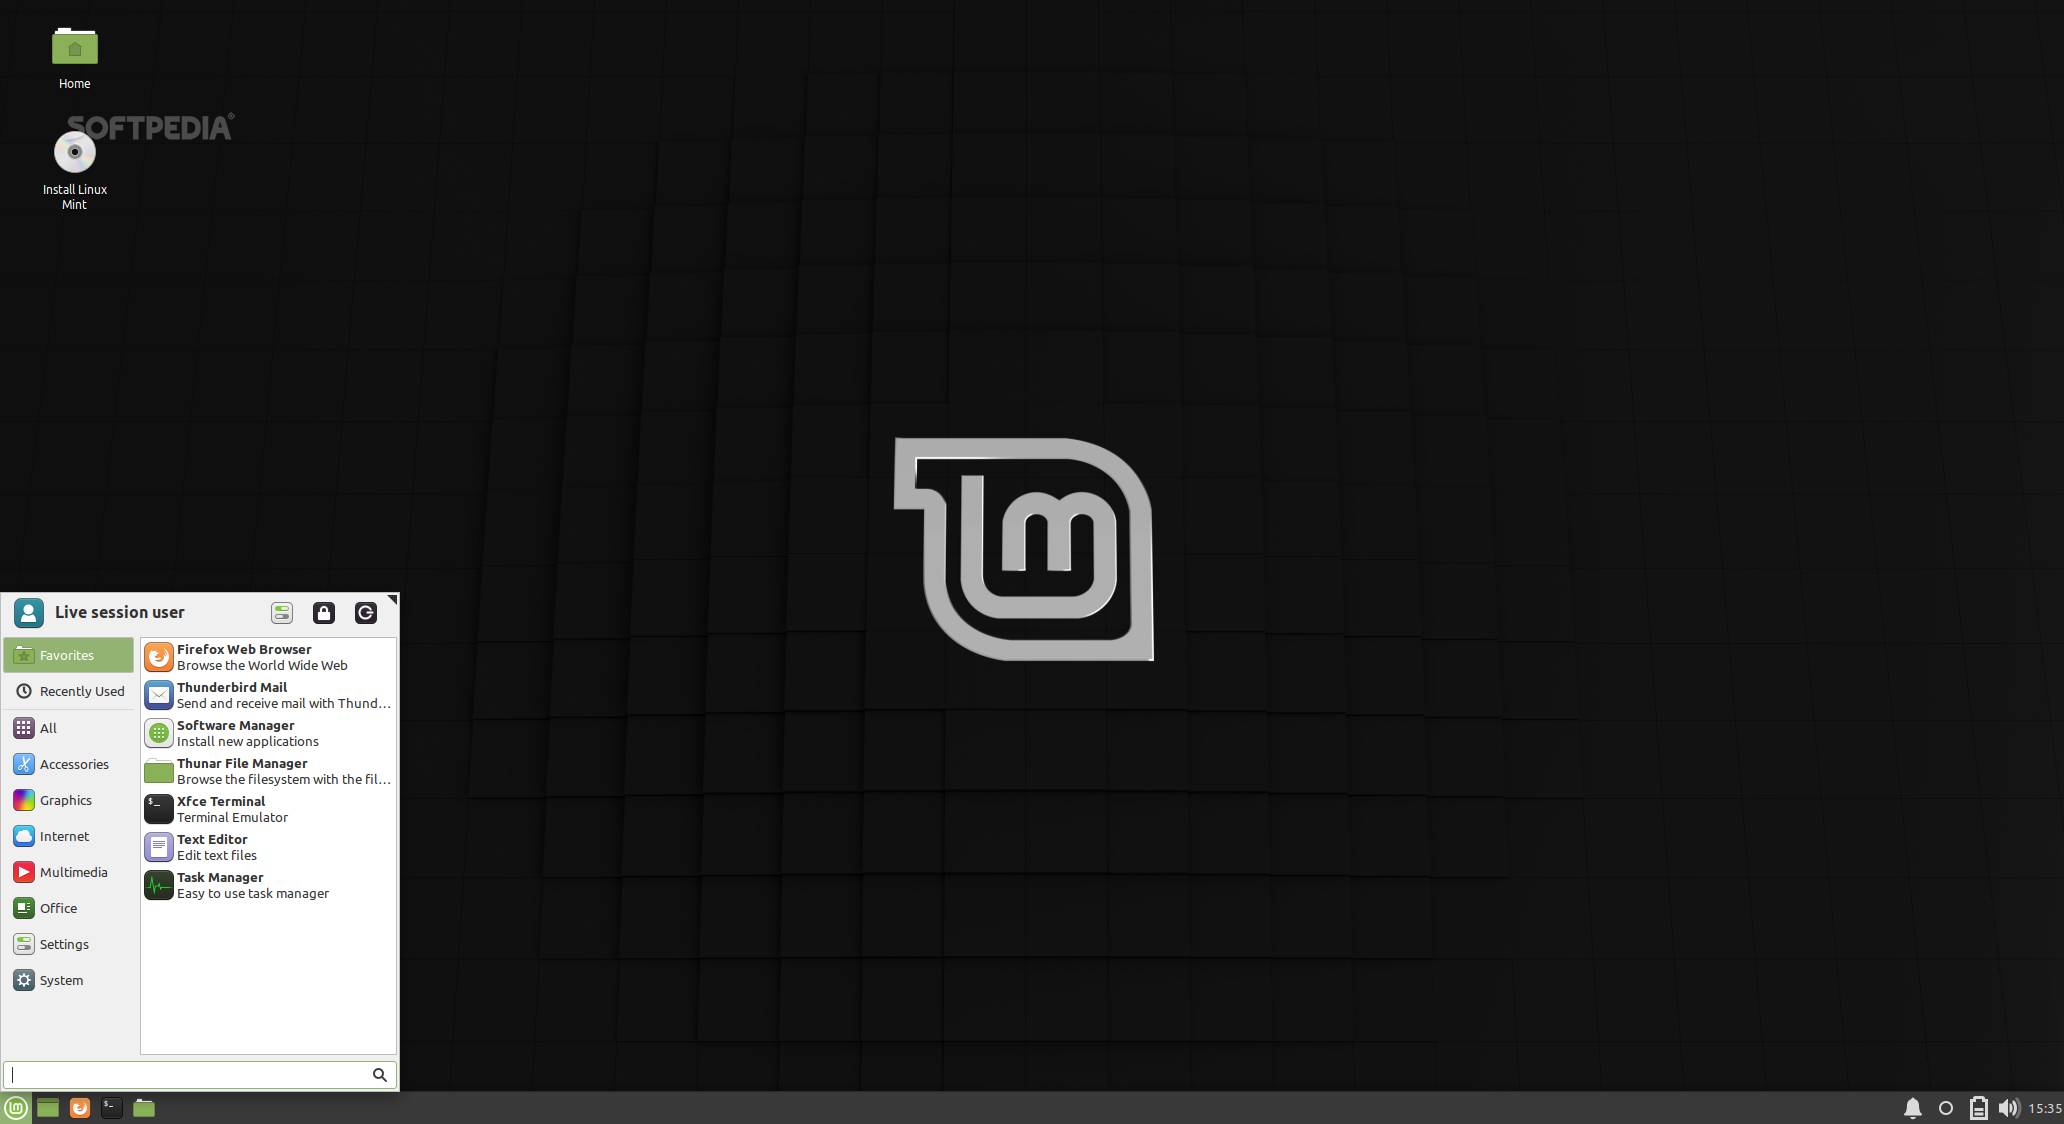 Linux Mint 19 3 Tricia Beta Now Available To Download With A Fresh New Look